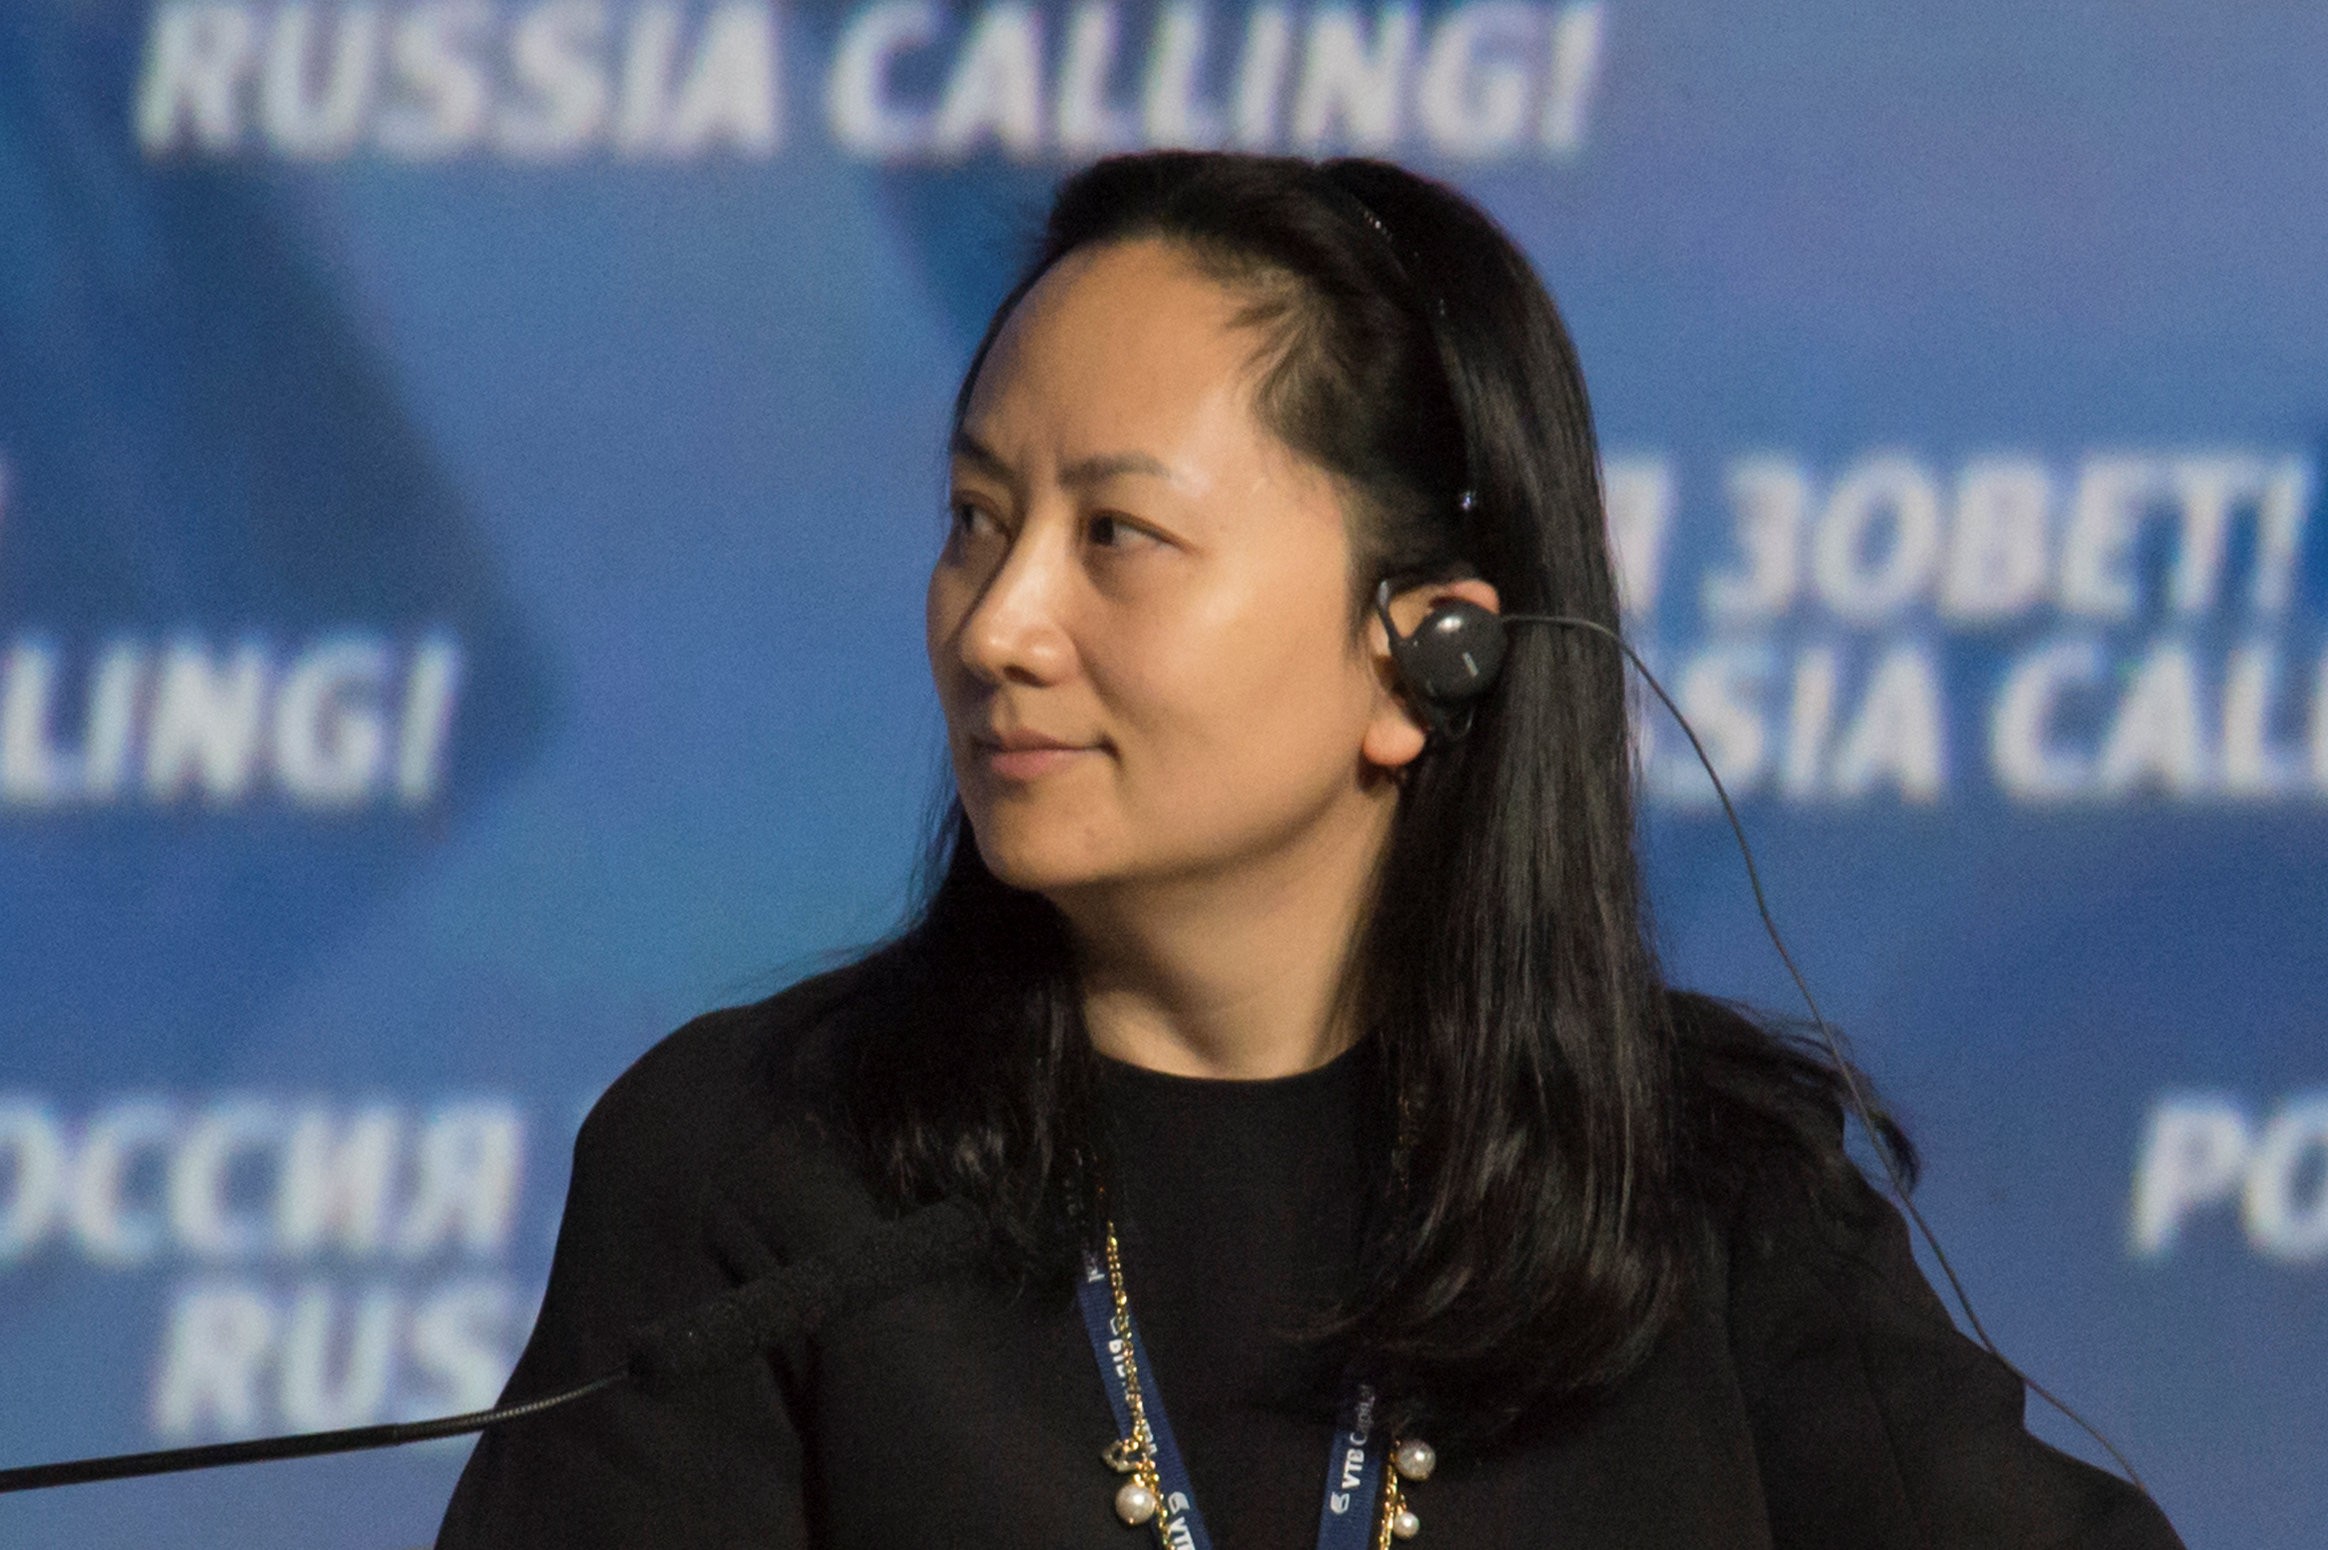 Huawei CFO Meng Wanzhou, photographed here at a session of an investment forum in Moscow in October 2014, was detained in Canada on December 1 at the request of the US government. Photo: Reuters